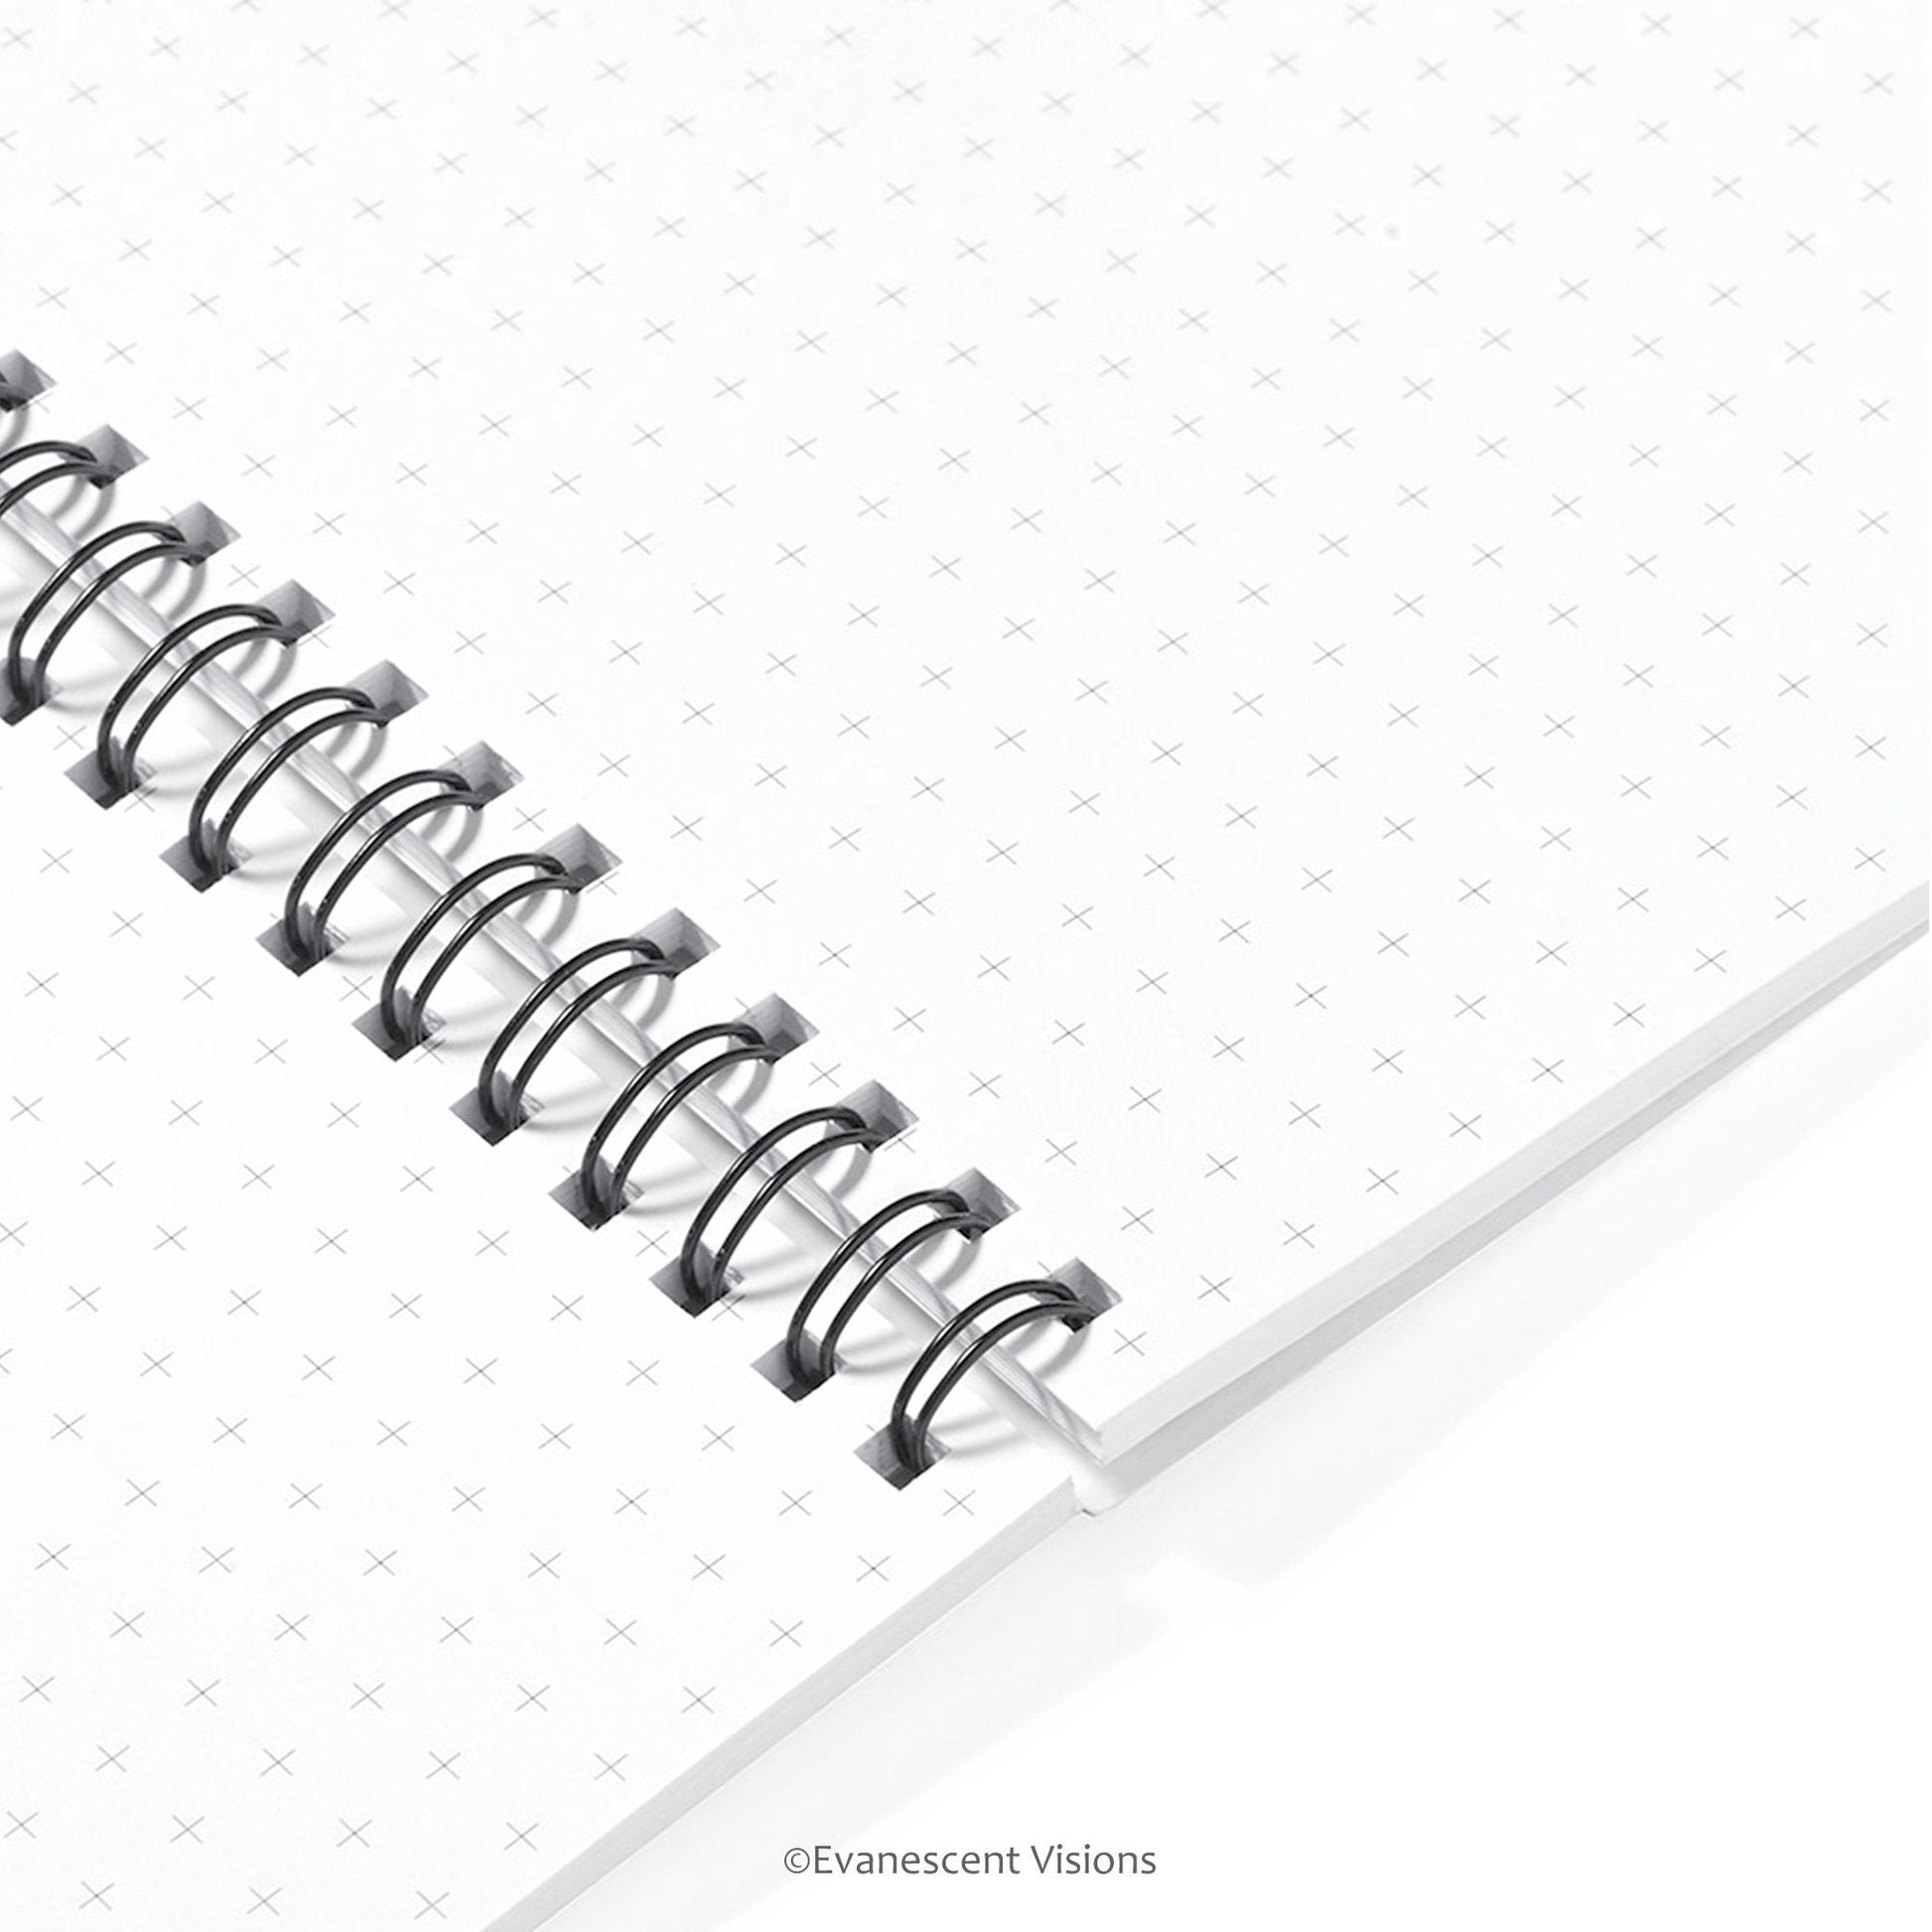  view of the cross hatch graph paper inside the notebook